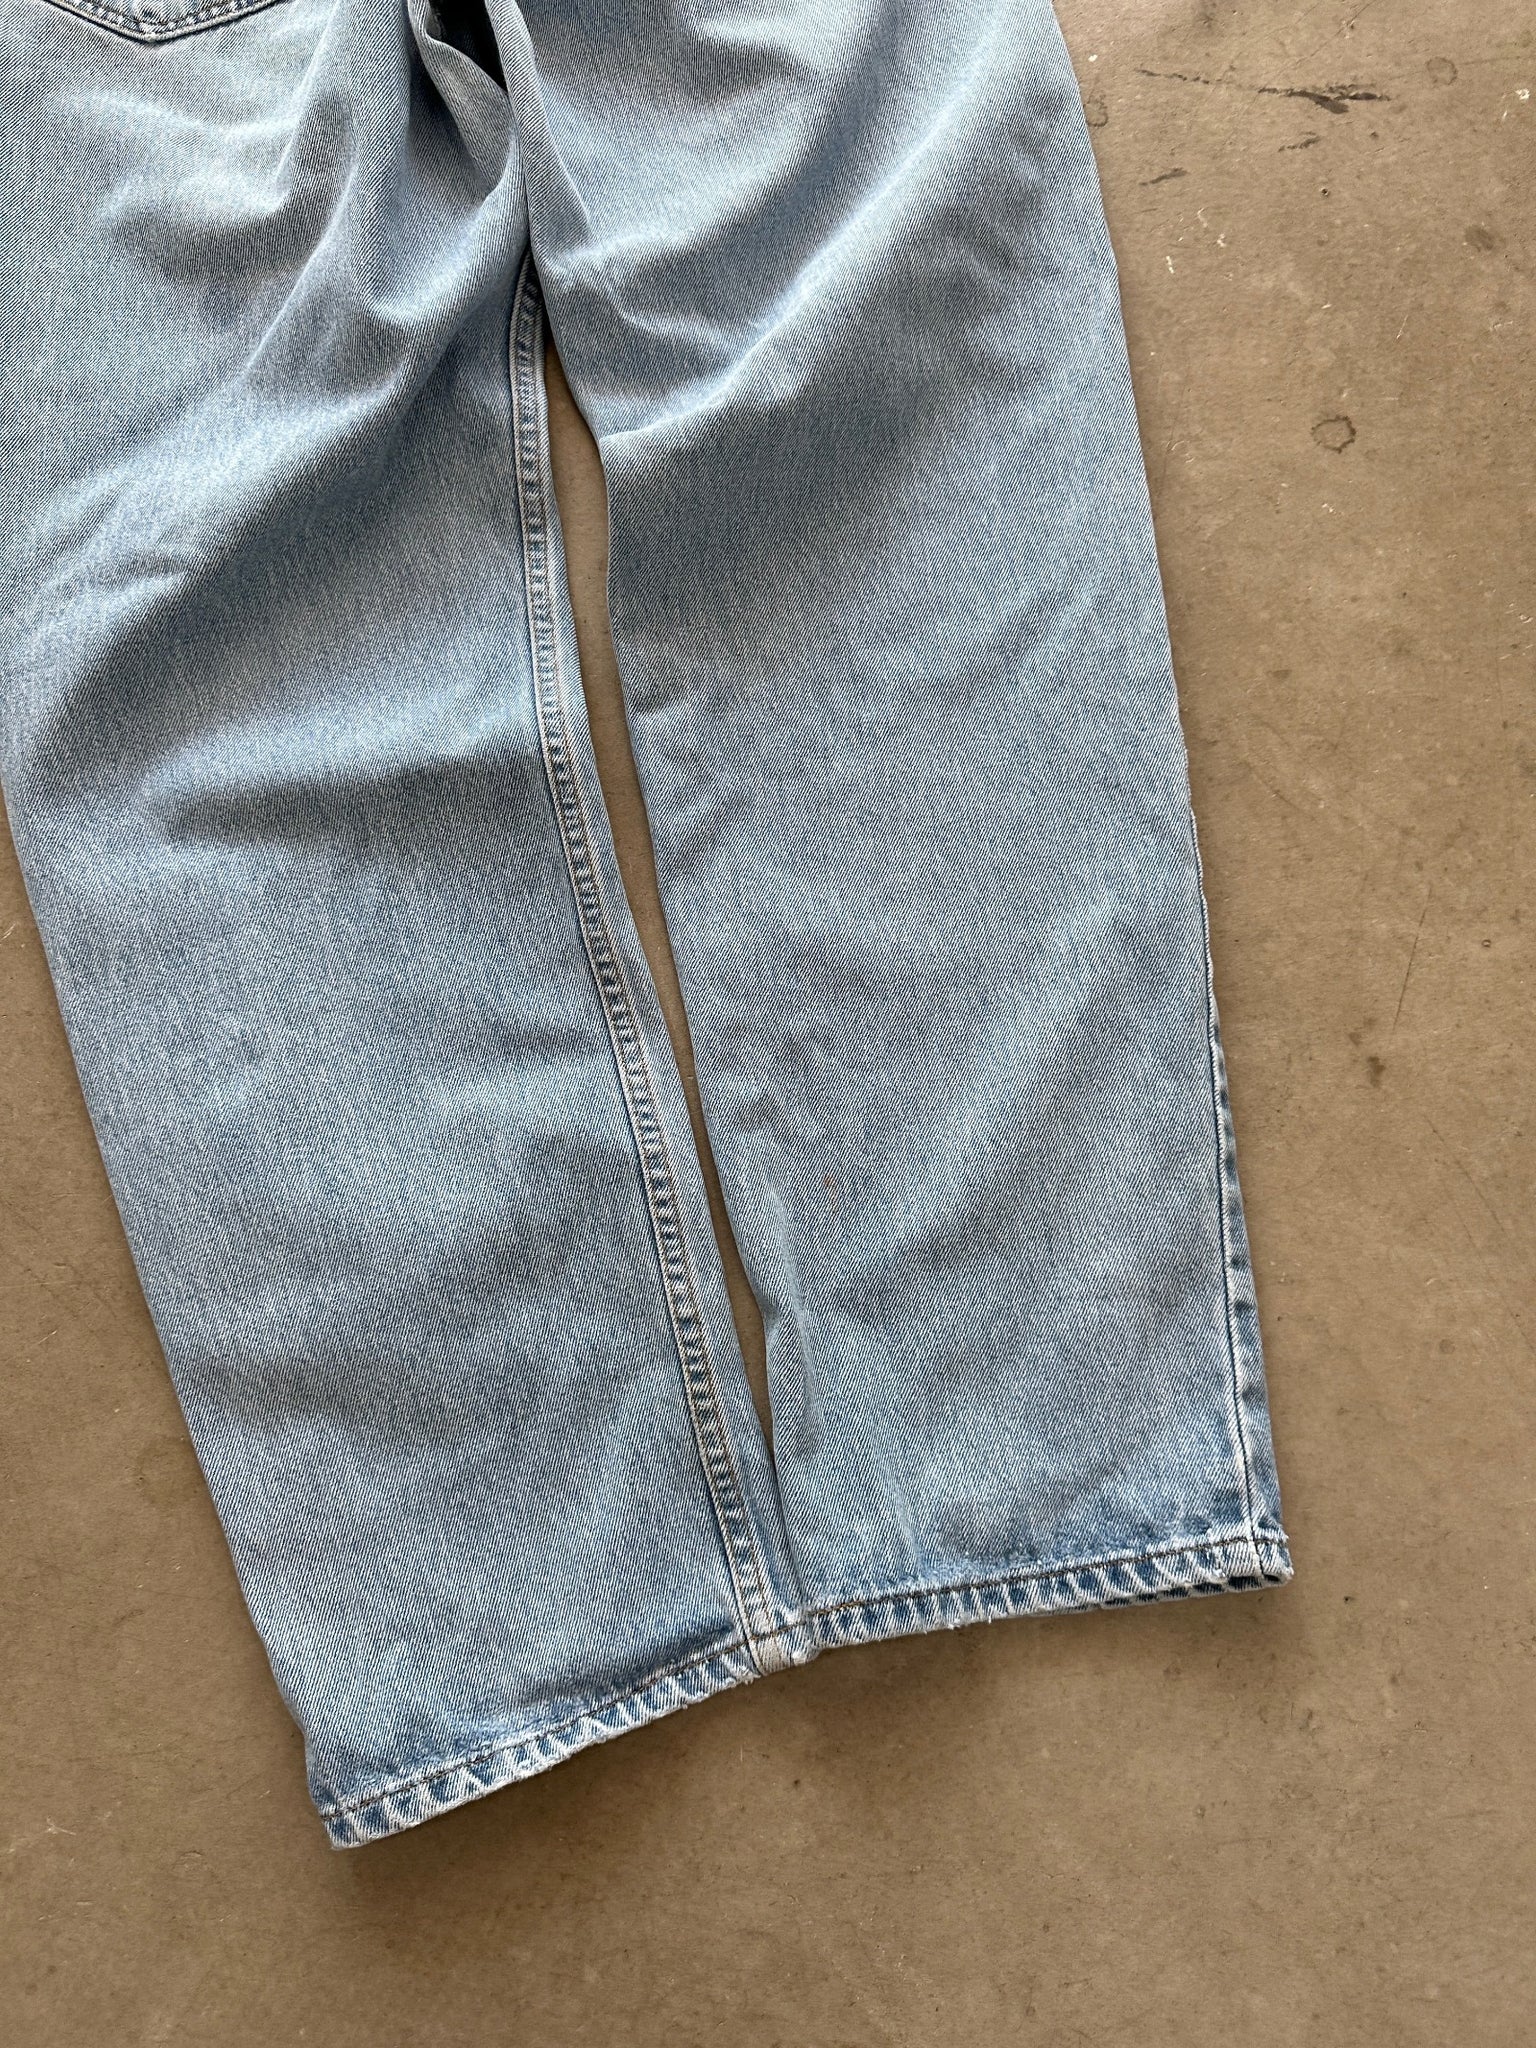 2000 Levi's 550 Relaxed Jeans - 34 x 32